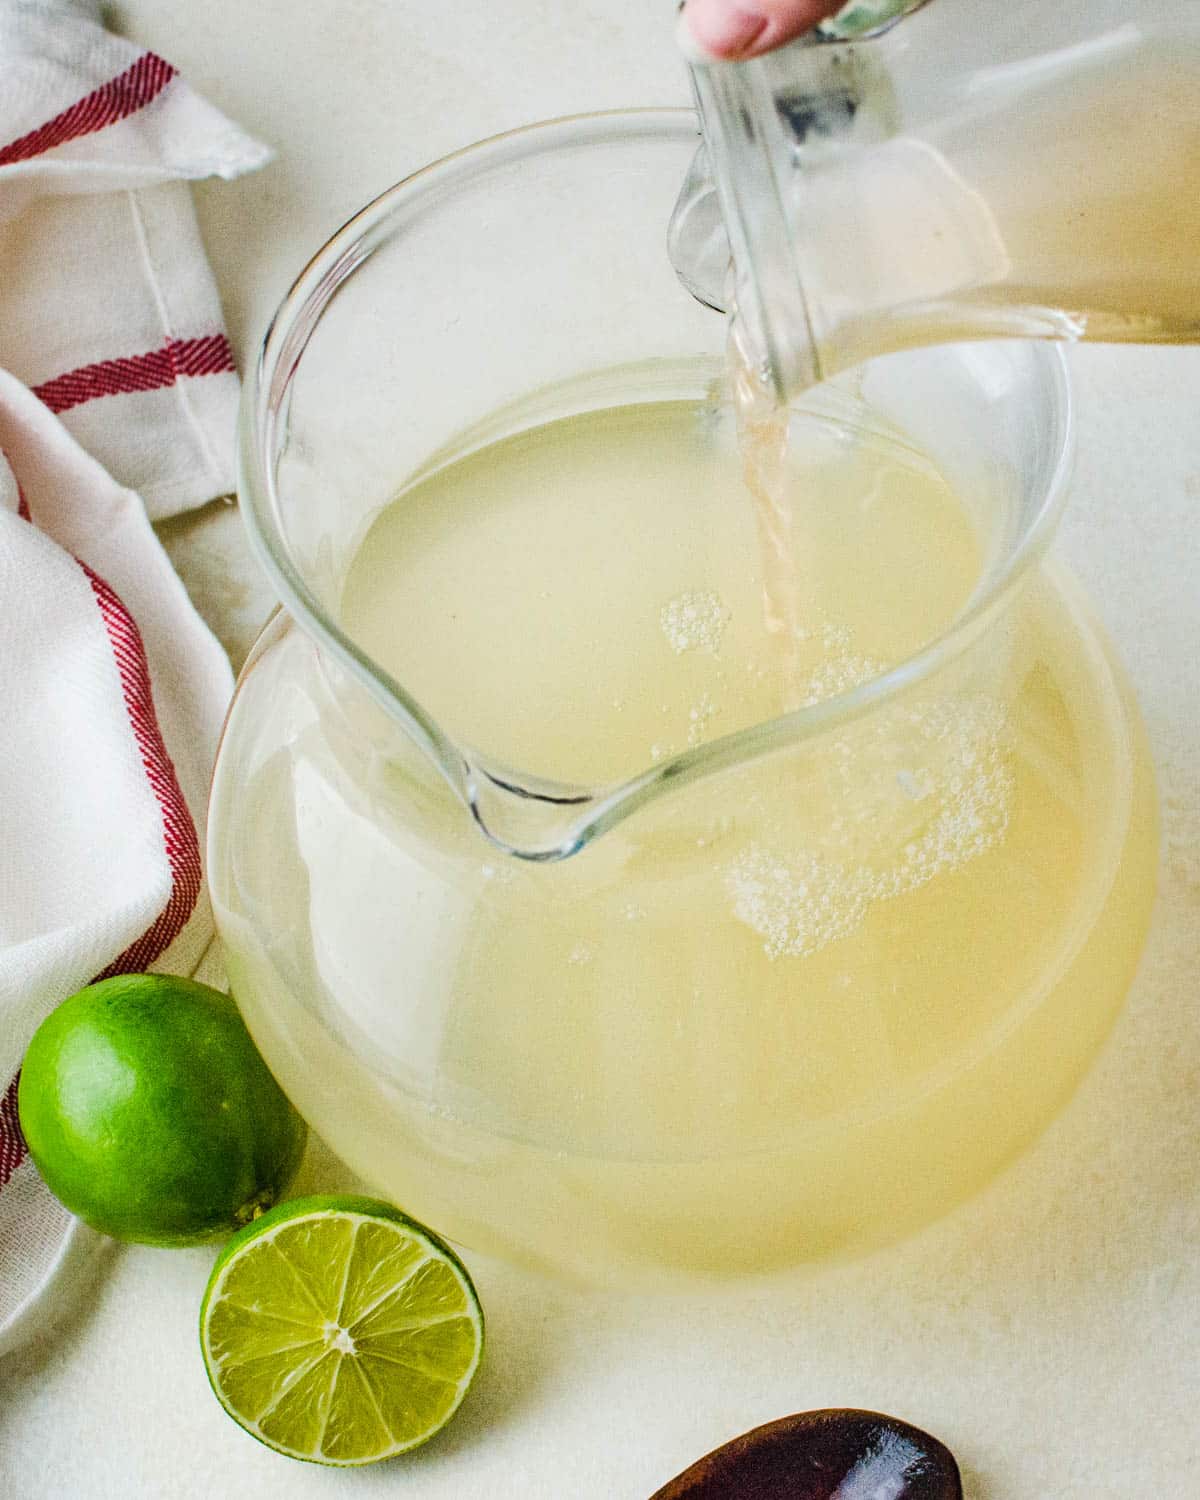 Adding guava simple syrup to the lime mixture.